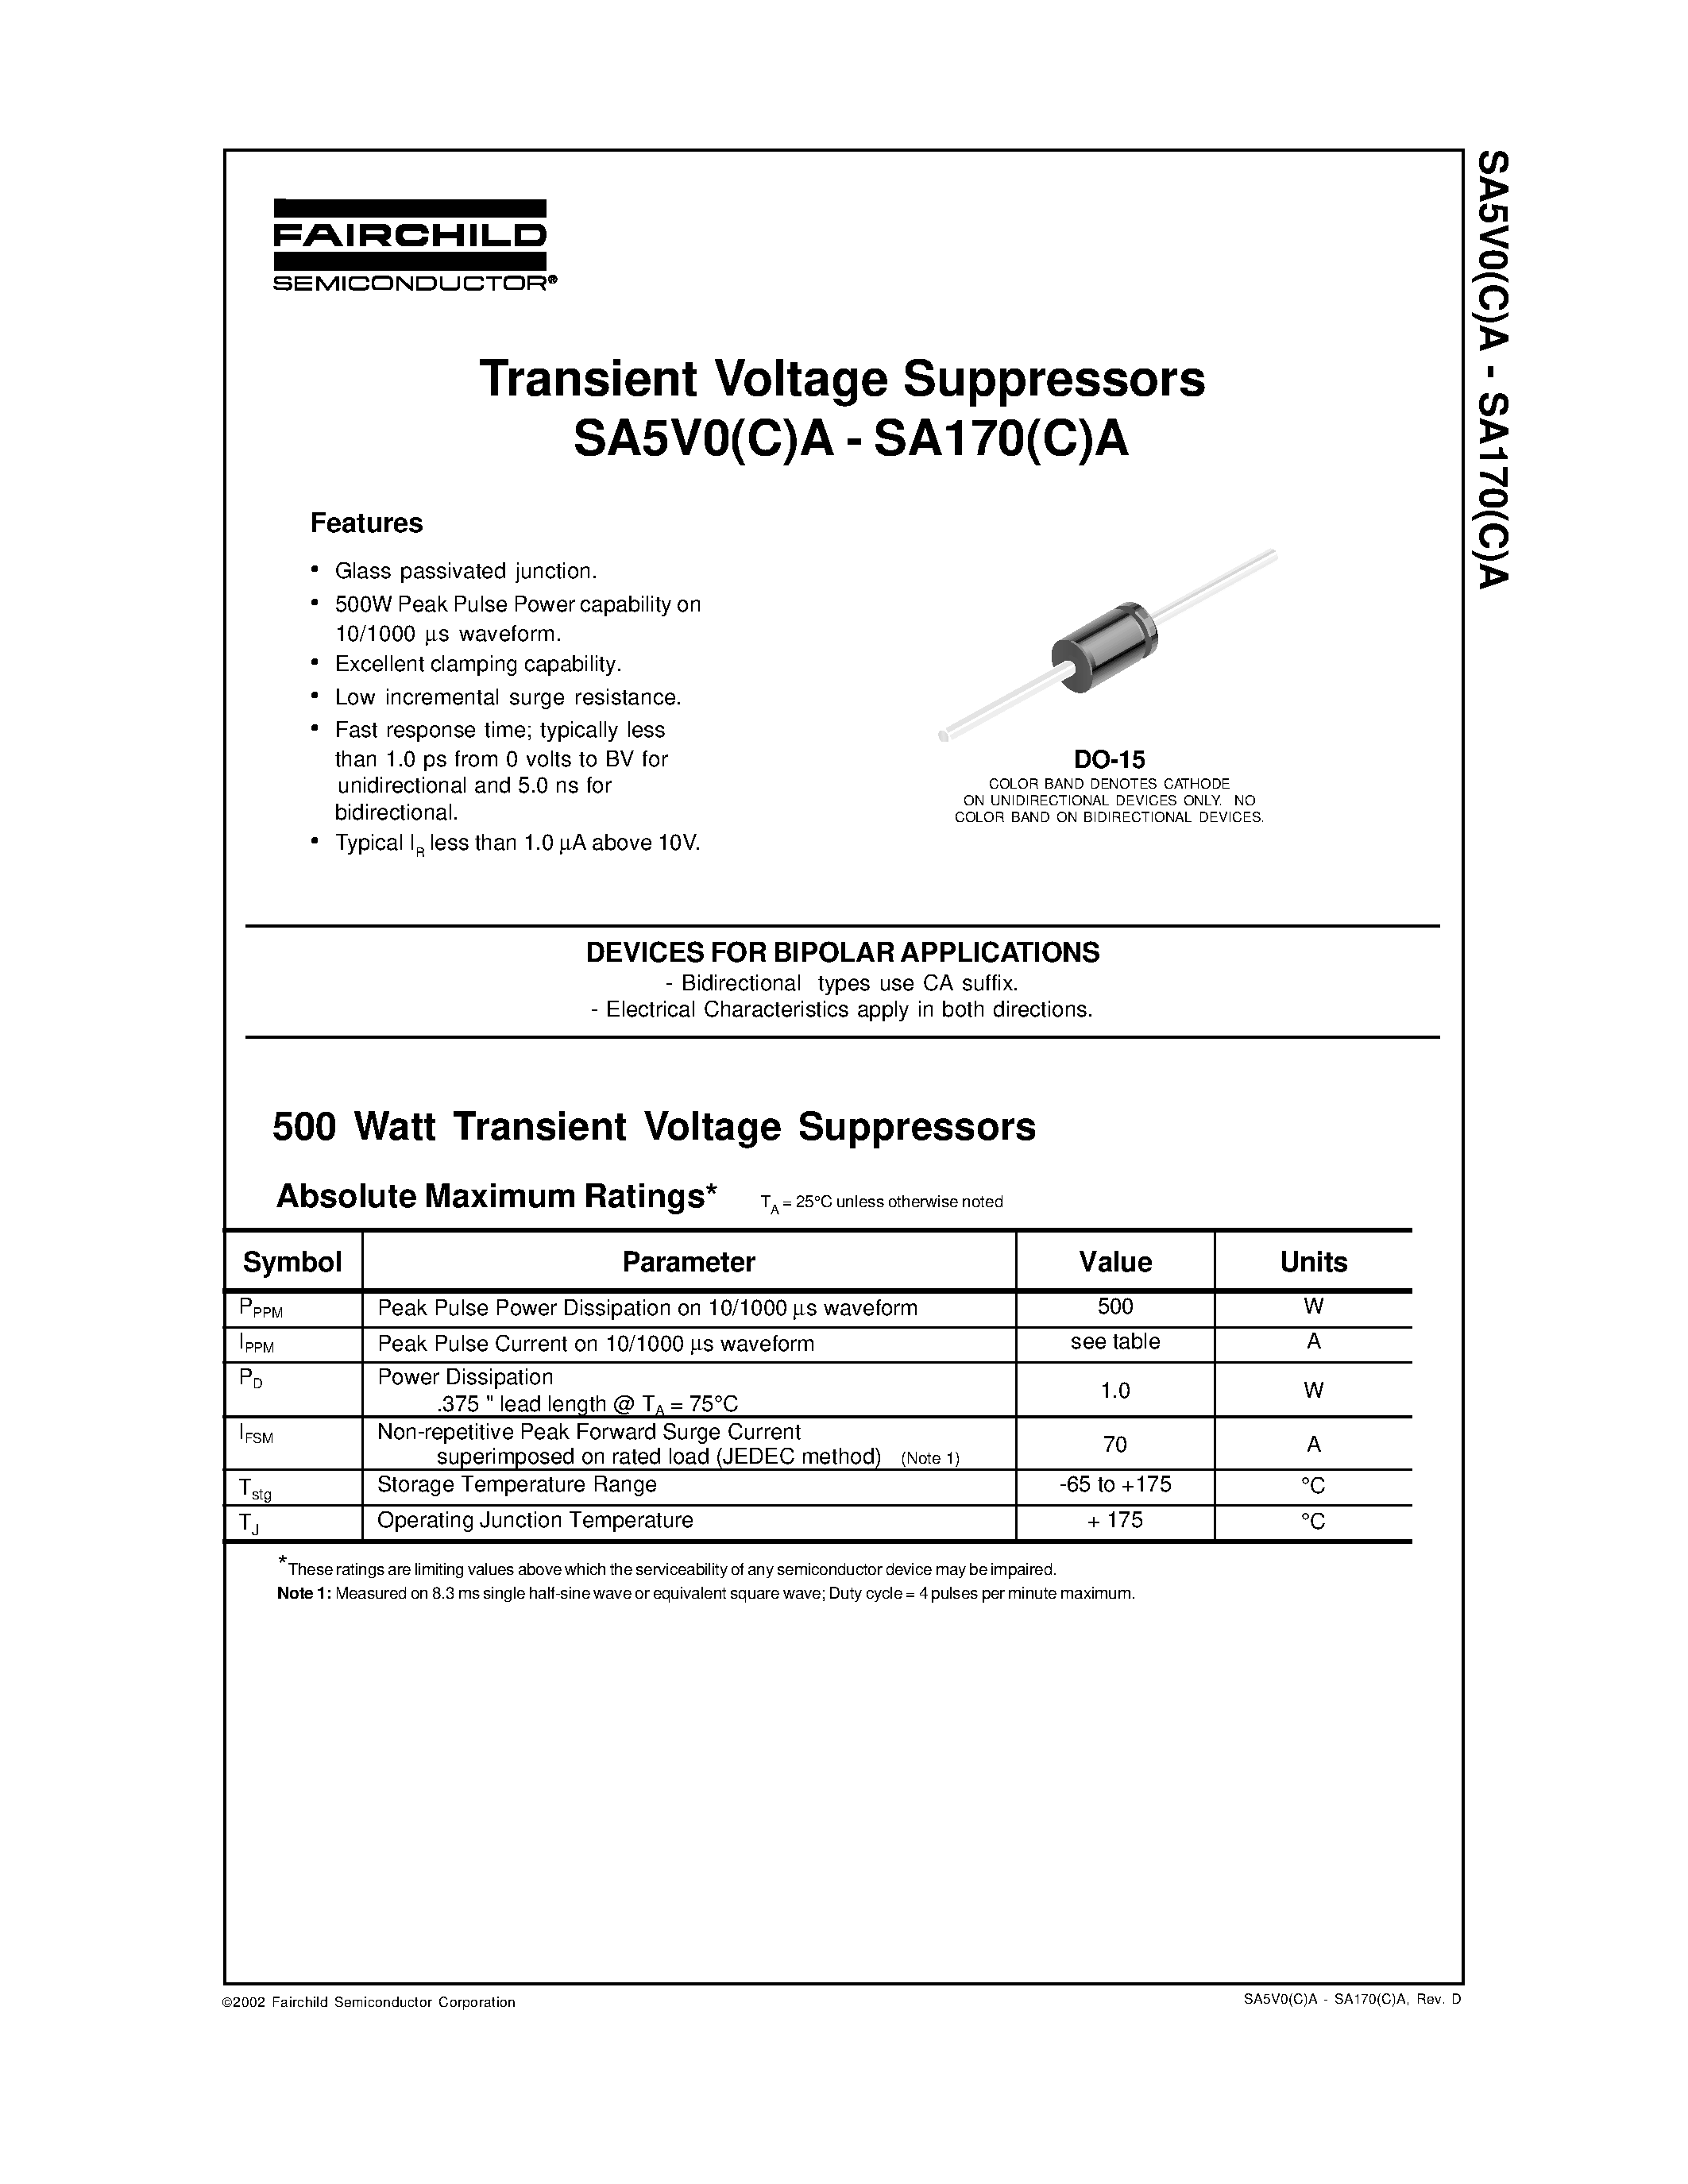 Datasheet SA100A - Transient Voltage Suppressors page 1